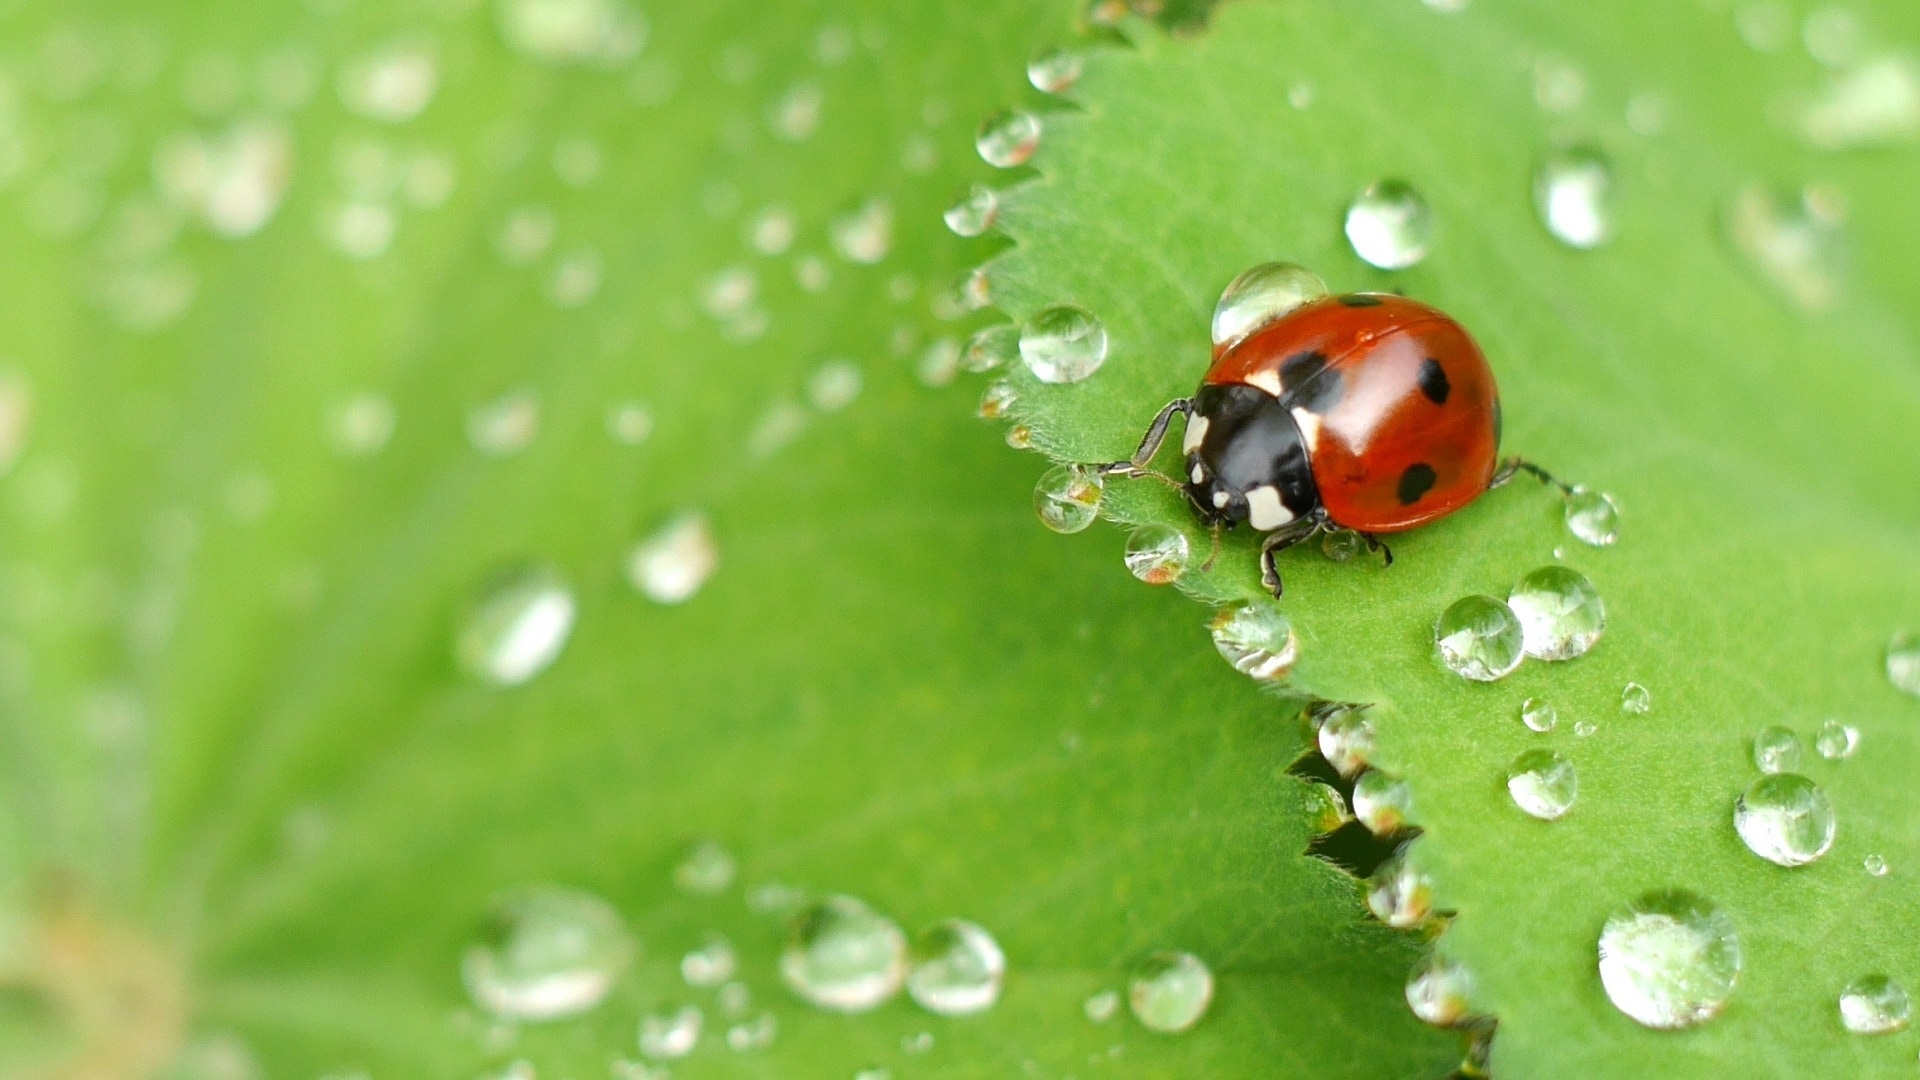 Beetle, Water Droplets, Insect, Ladybug, green color, one animal